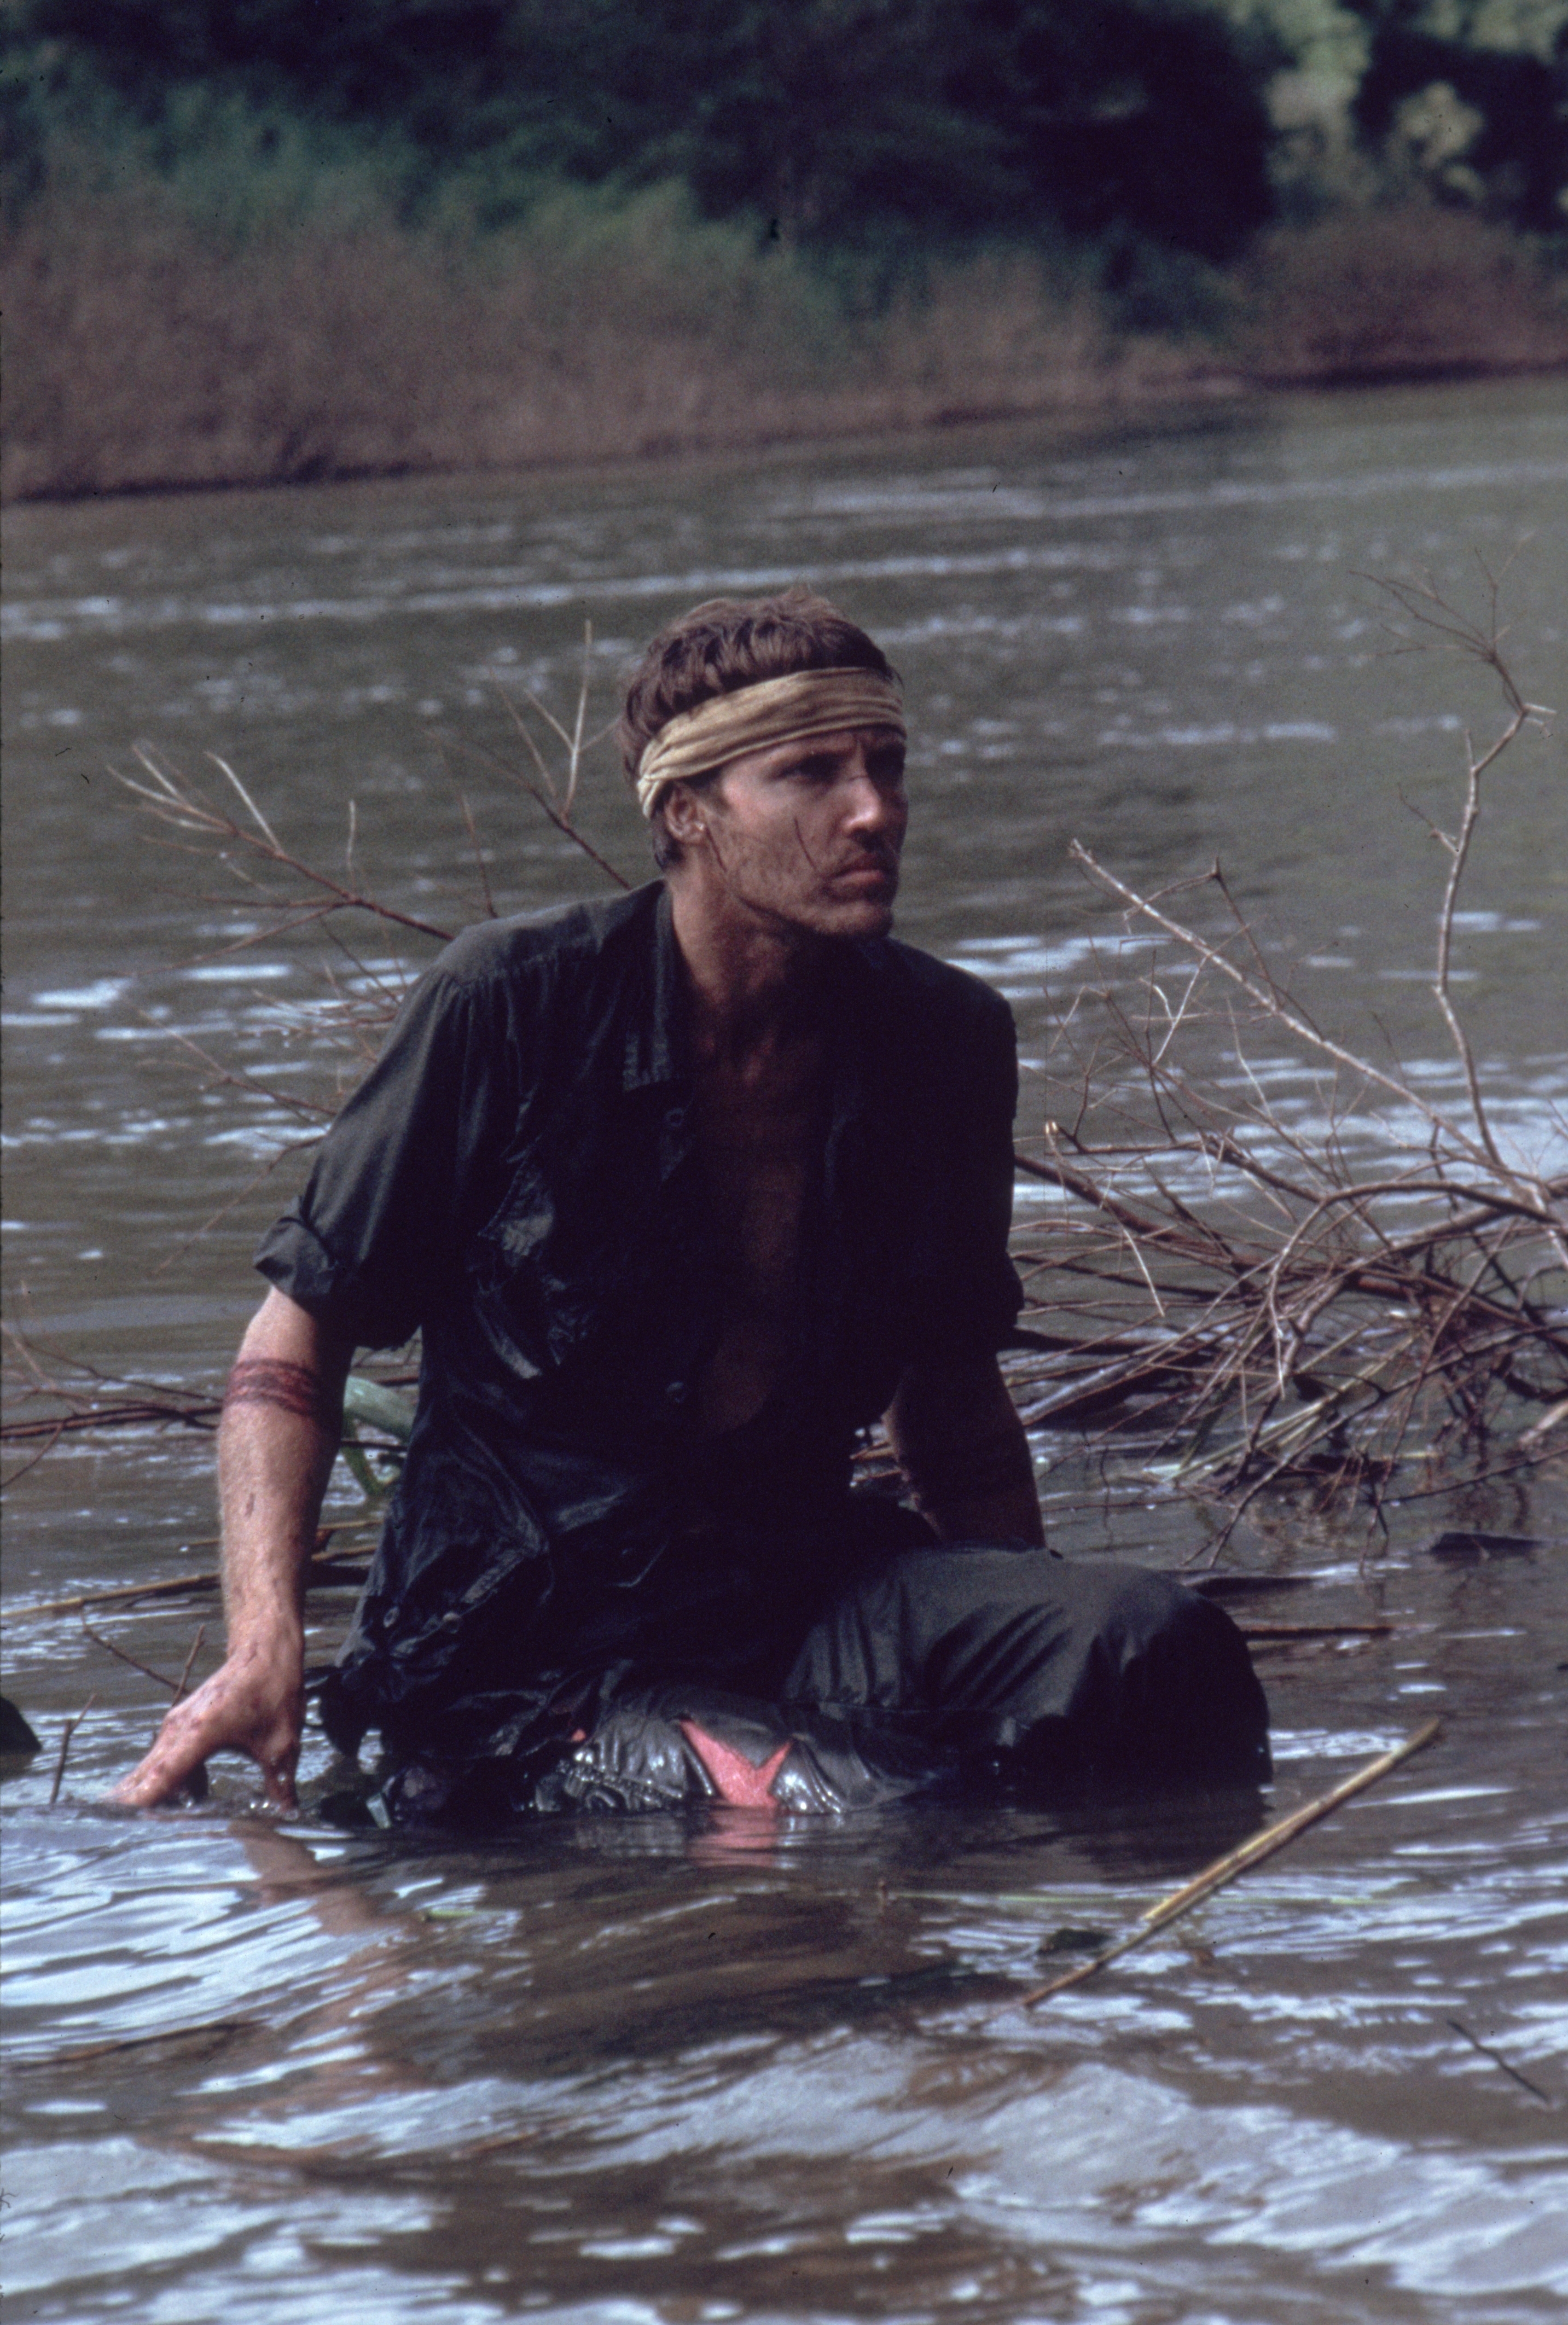 Christopher crouched in a body of water and wearing a bandana